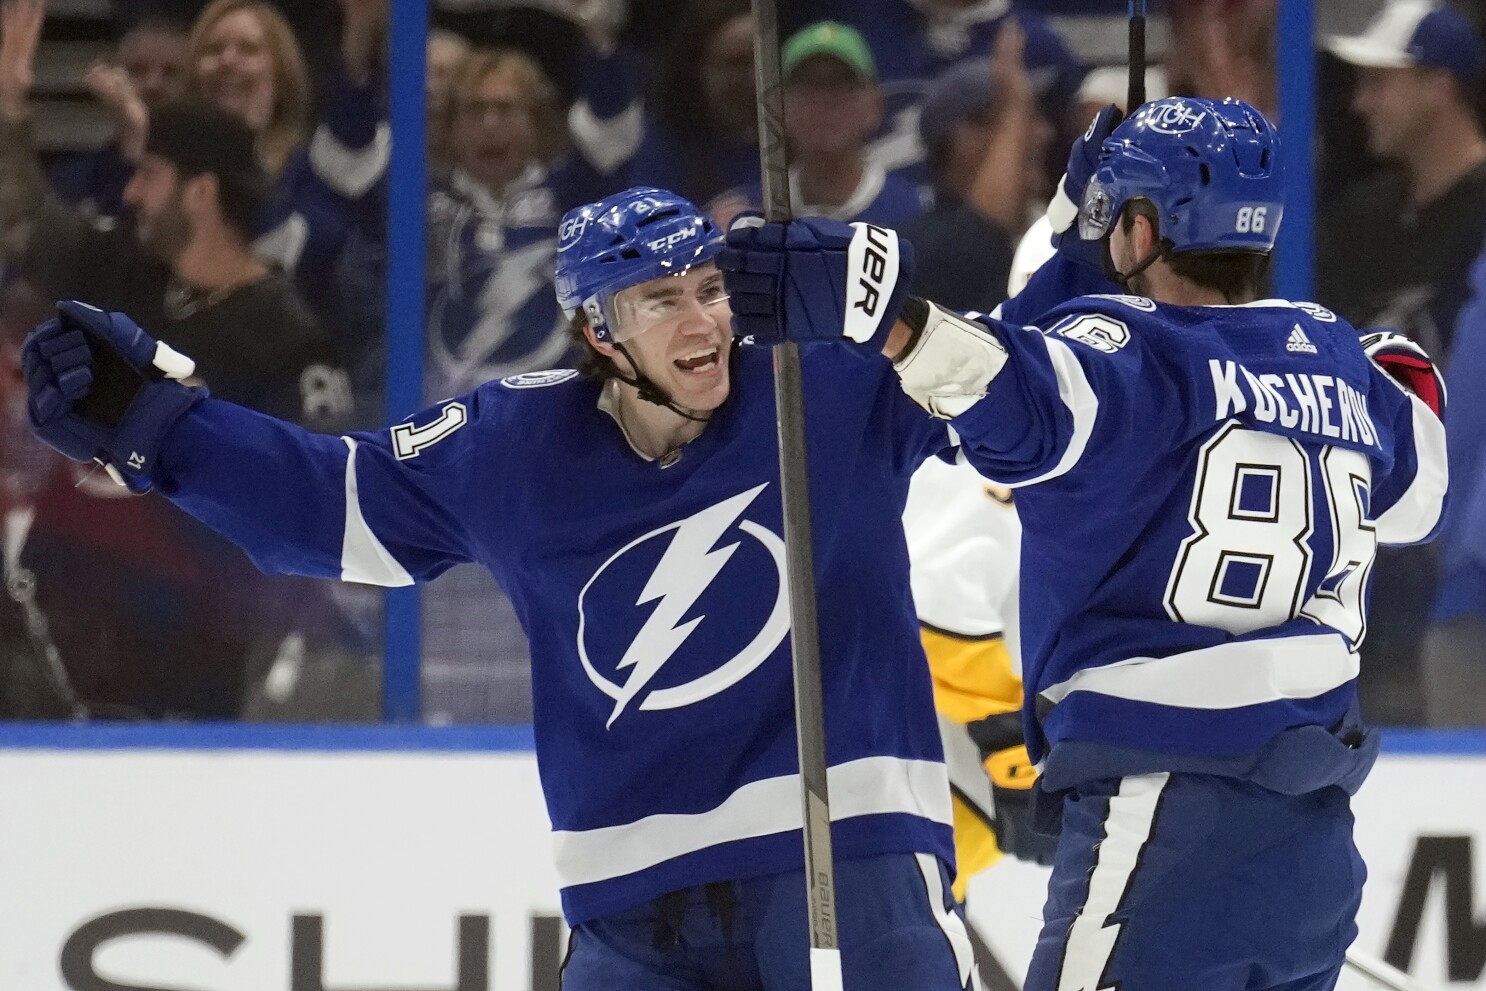 Lightning D-man Ryan McDonagh out for Game 2 vs. Bruins with undisclosed  injury